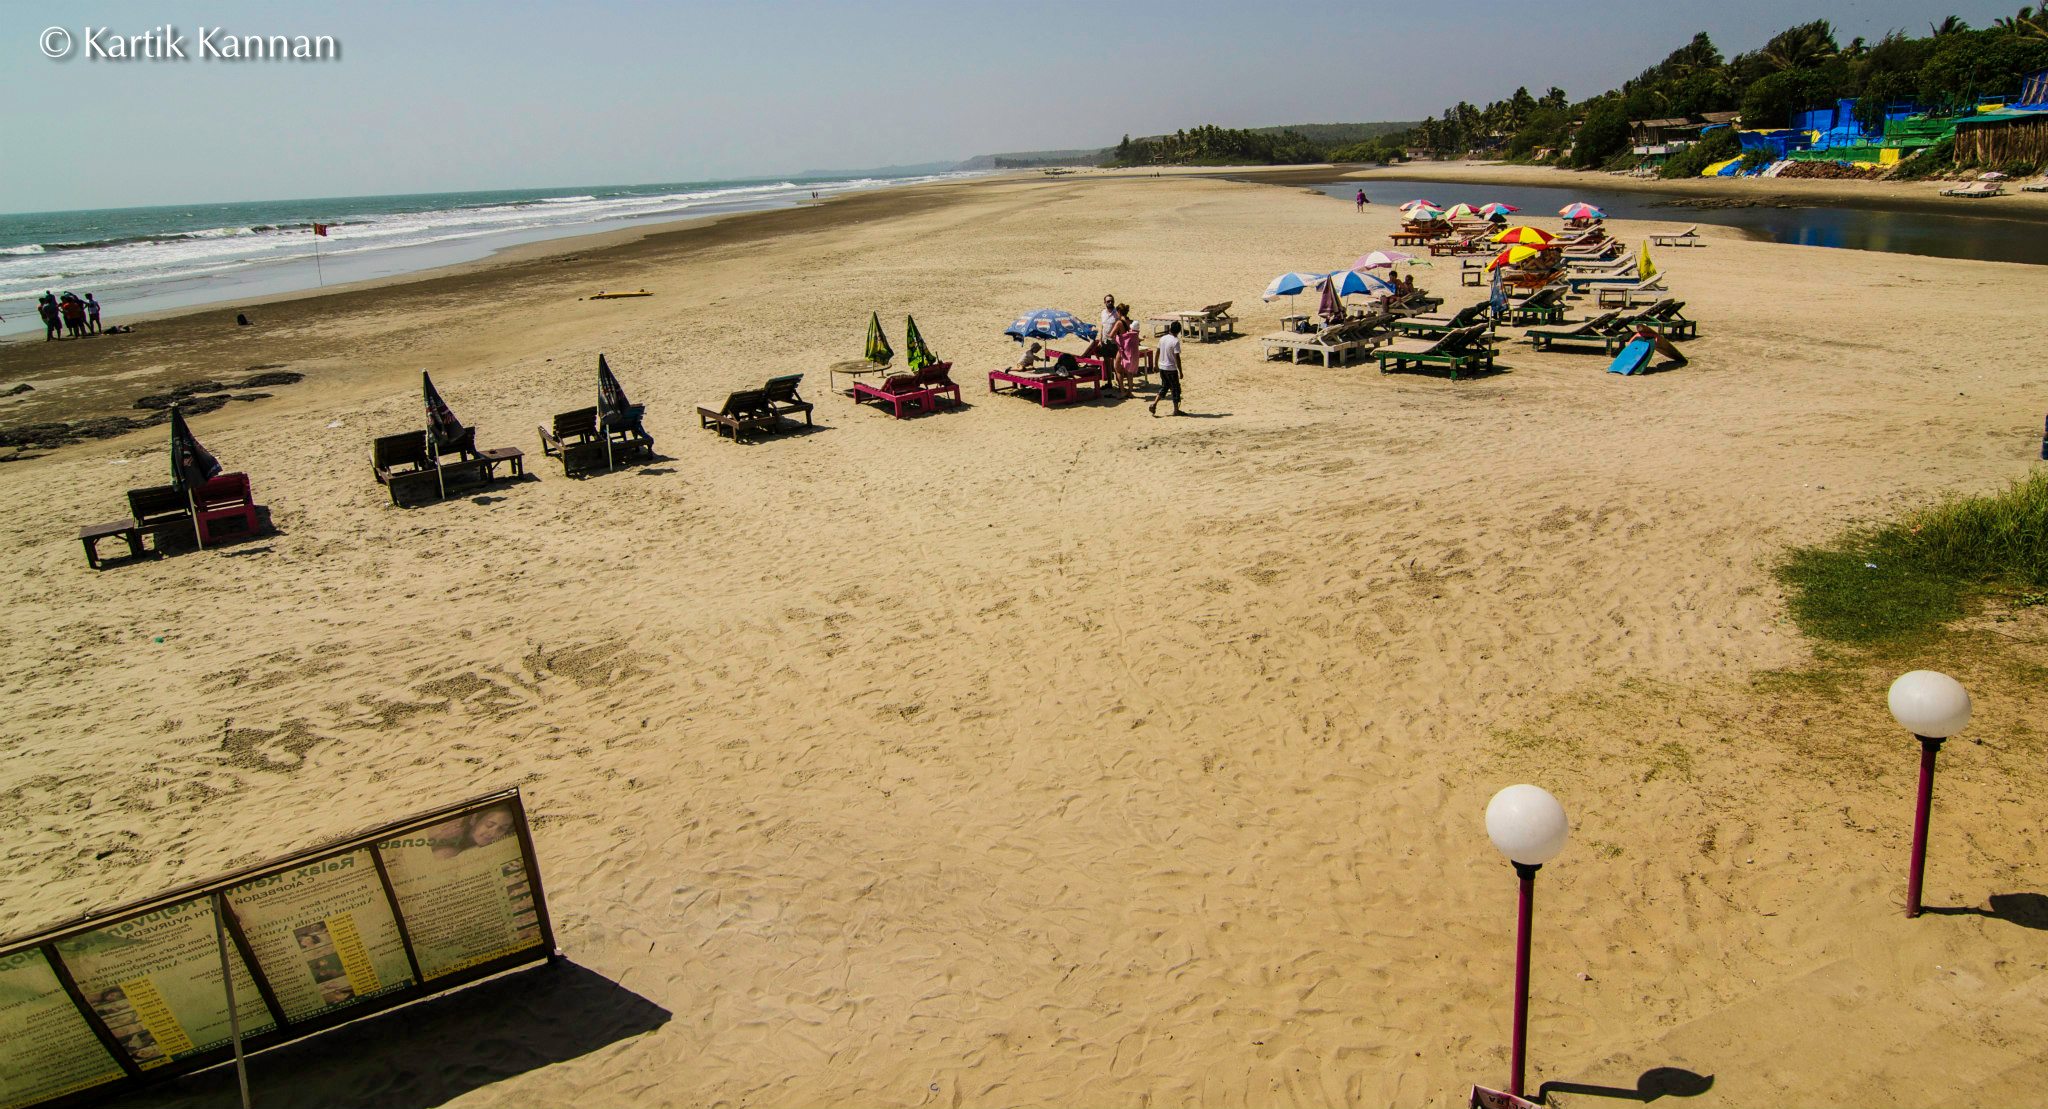 Aswem Beach in north Goa, 20 km's from Calangute (40 mins)